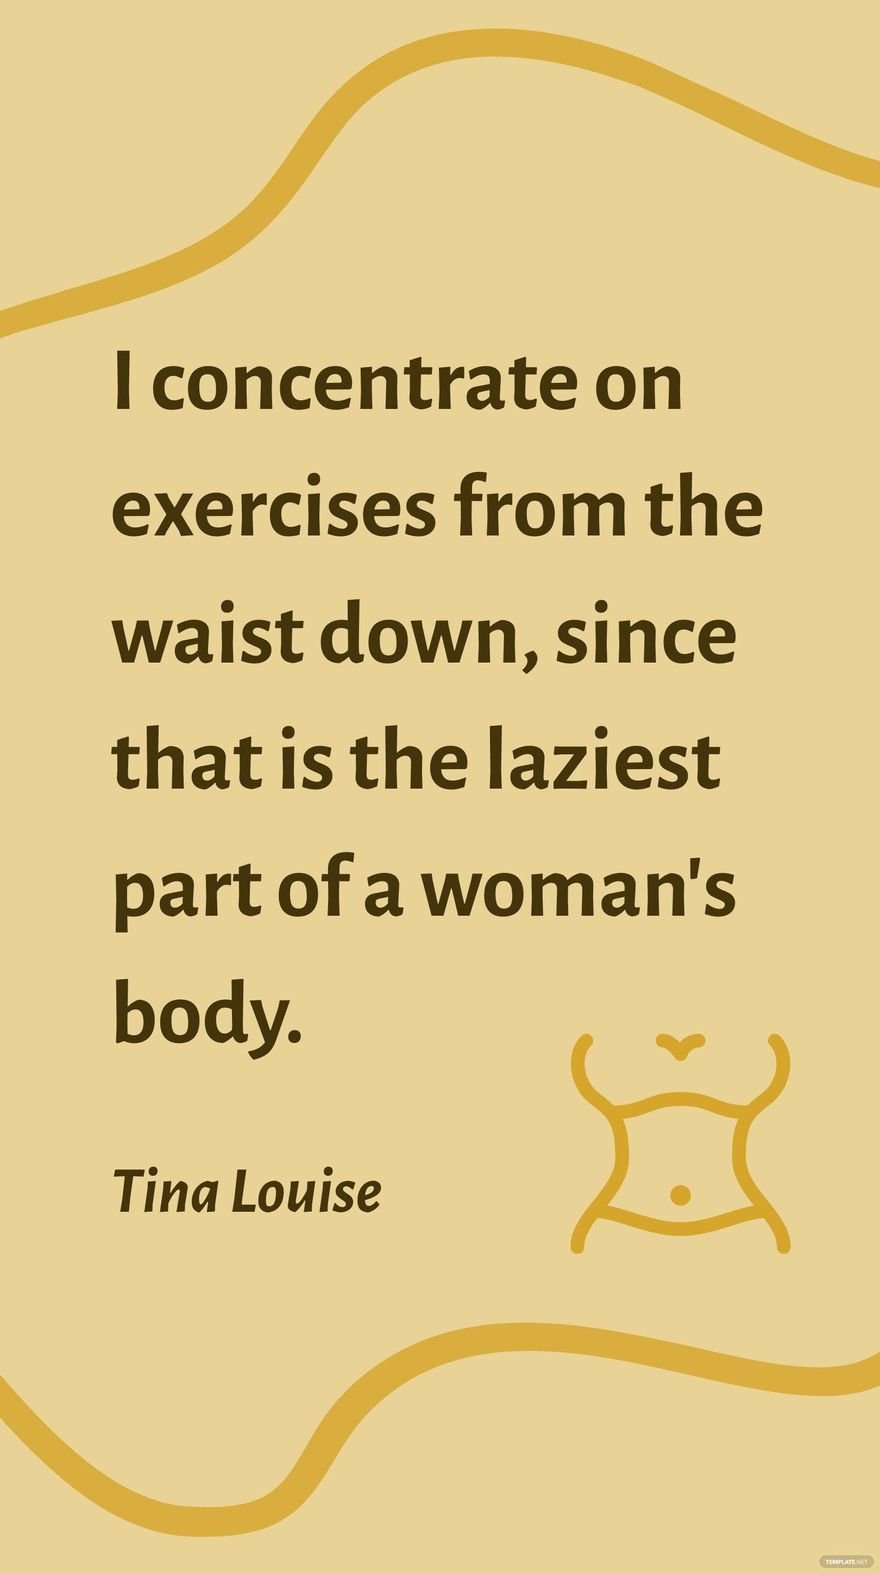 Tina Louise - I concentrate on exercises from the waist down, since that is the laziest part of a woman's body.